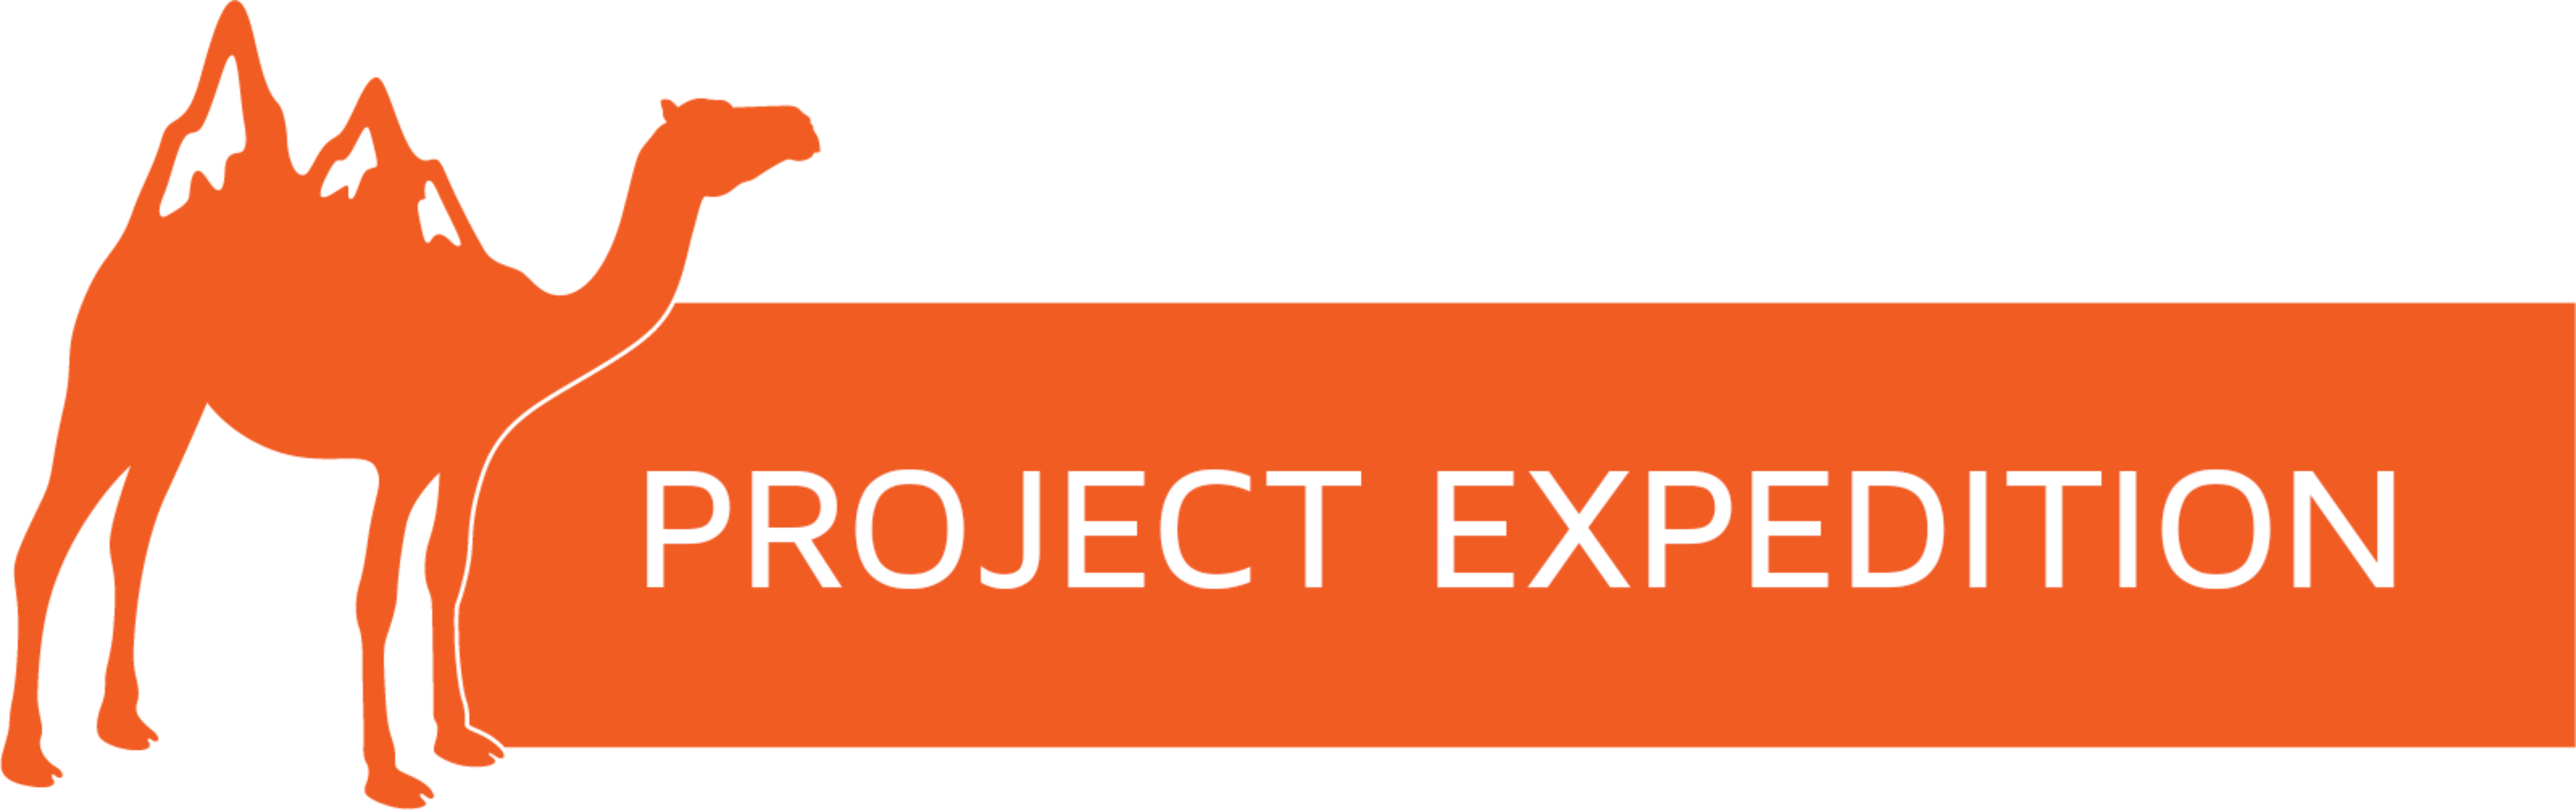 Project Expedition